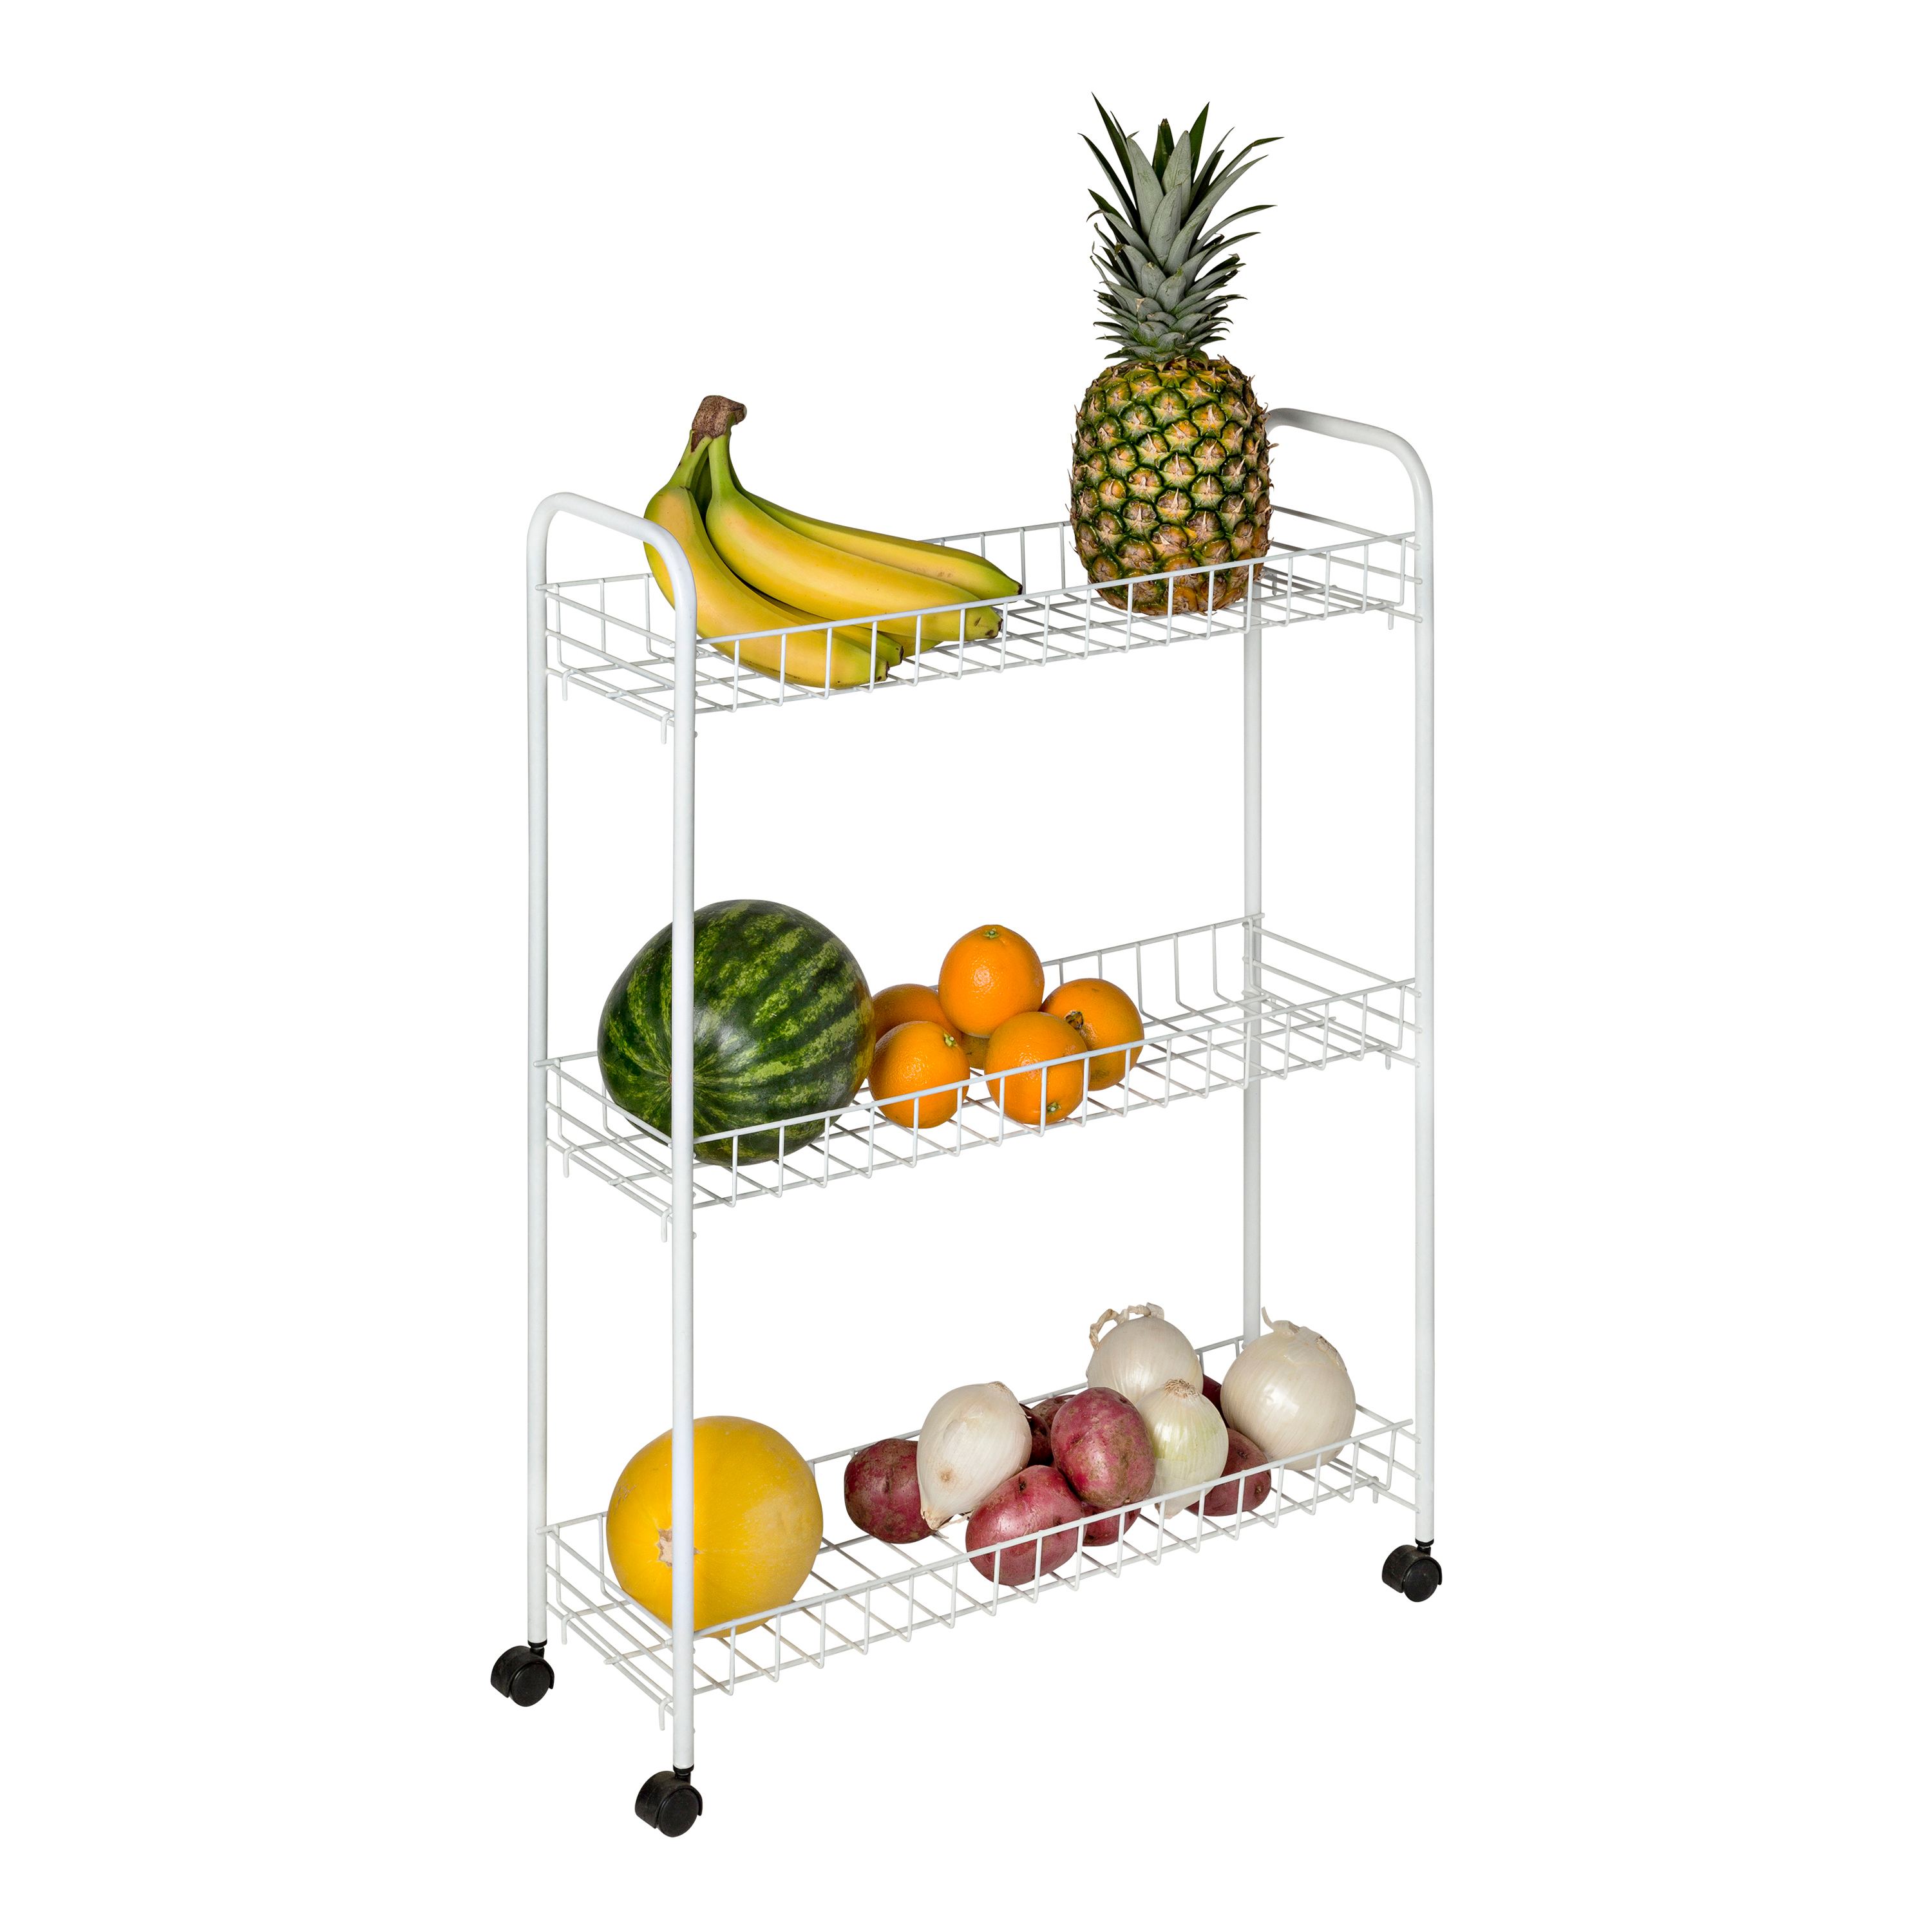 Honey-Can-Do 3-Tier Rolling Steel Storage Cart, White - image 5 of 7